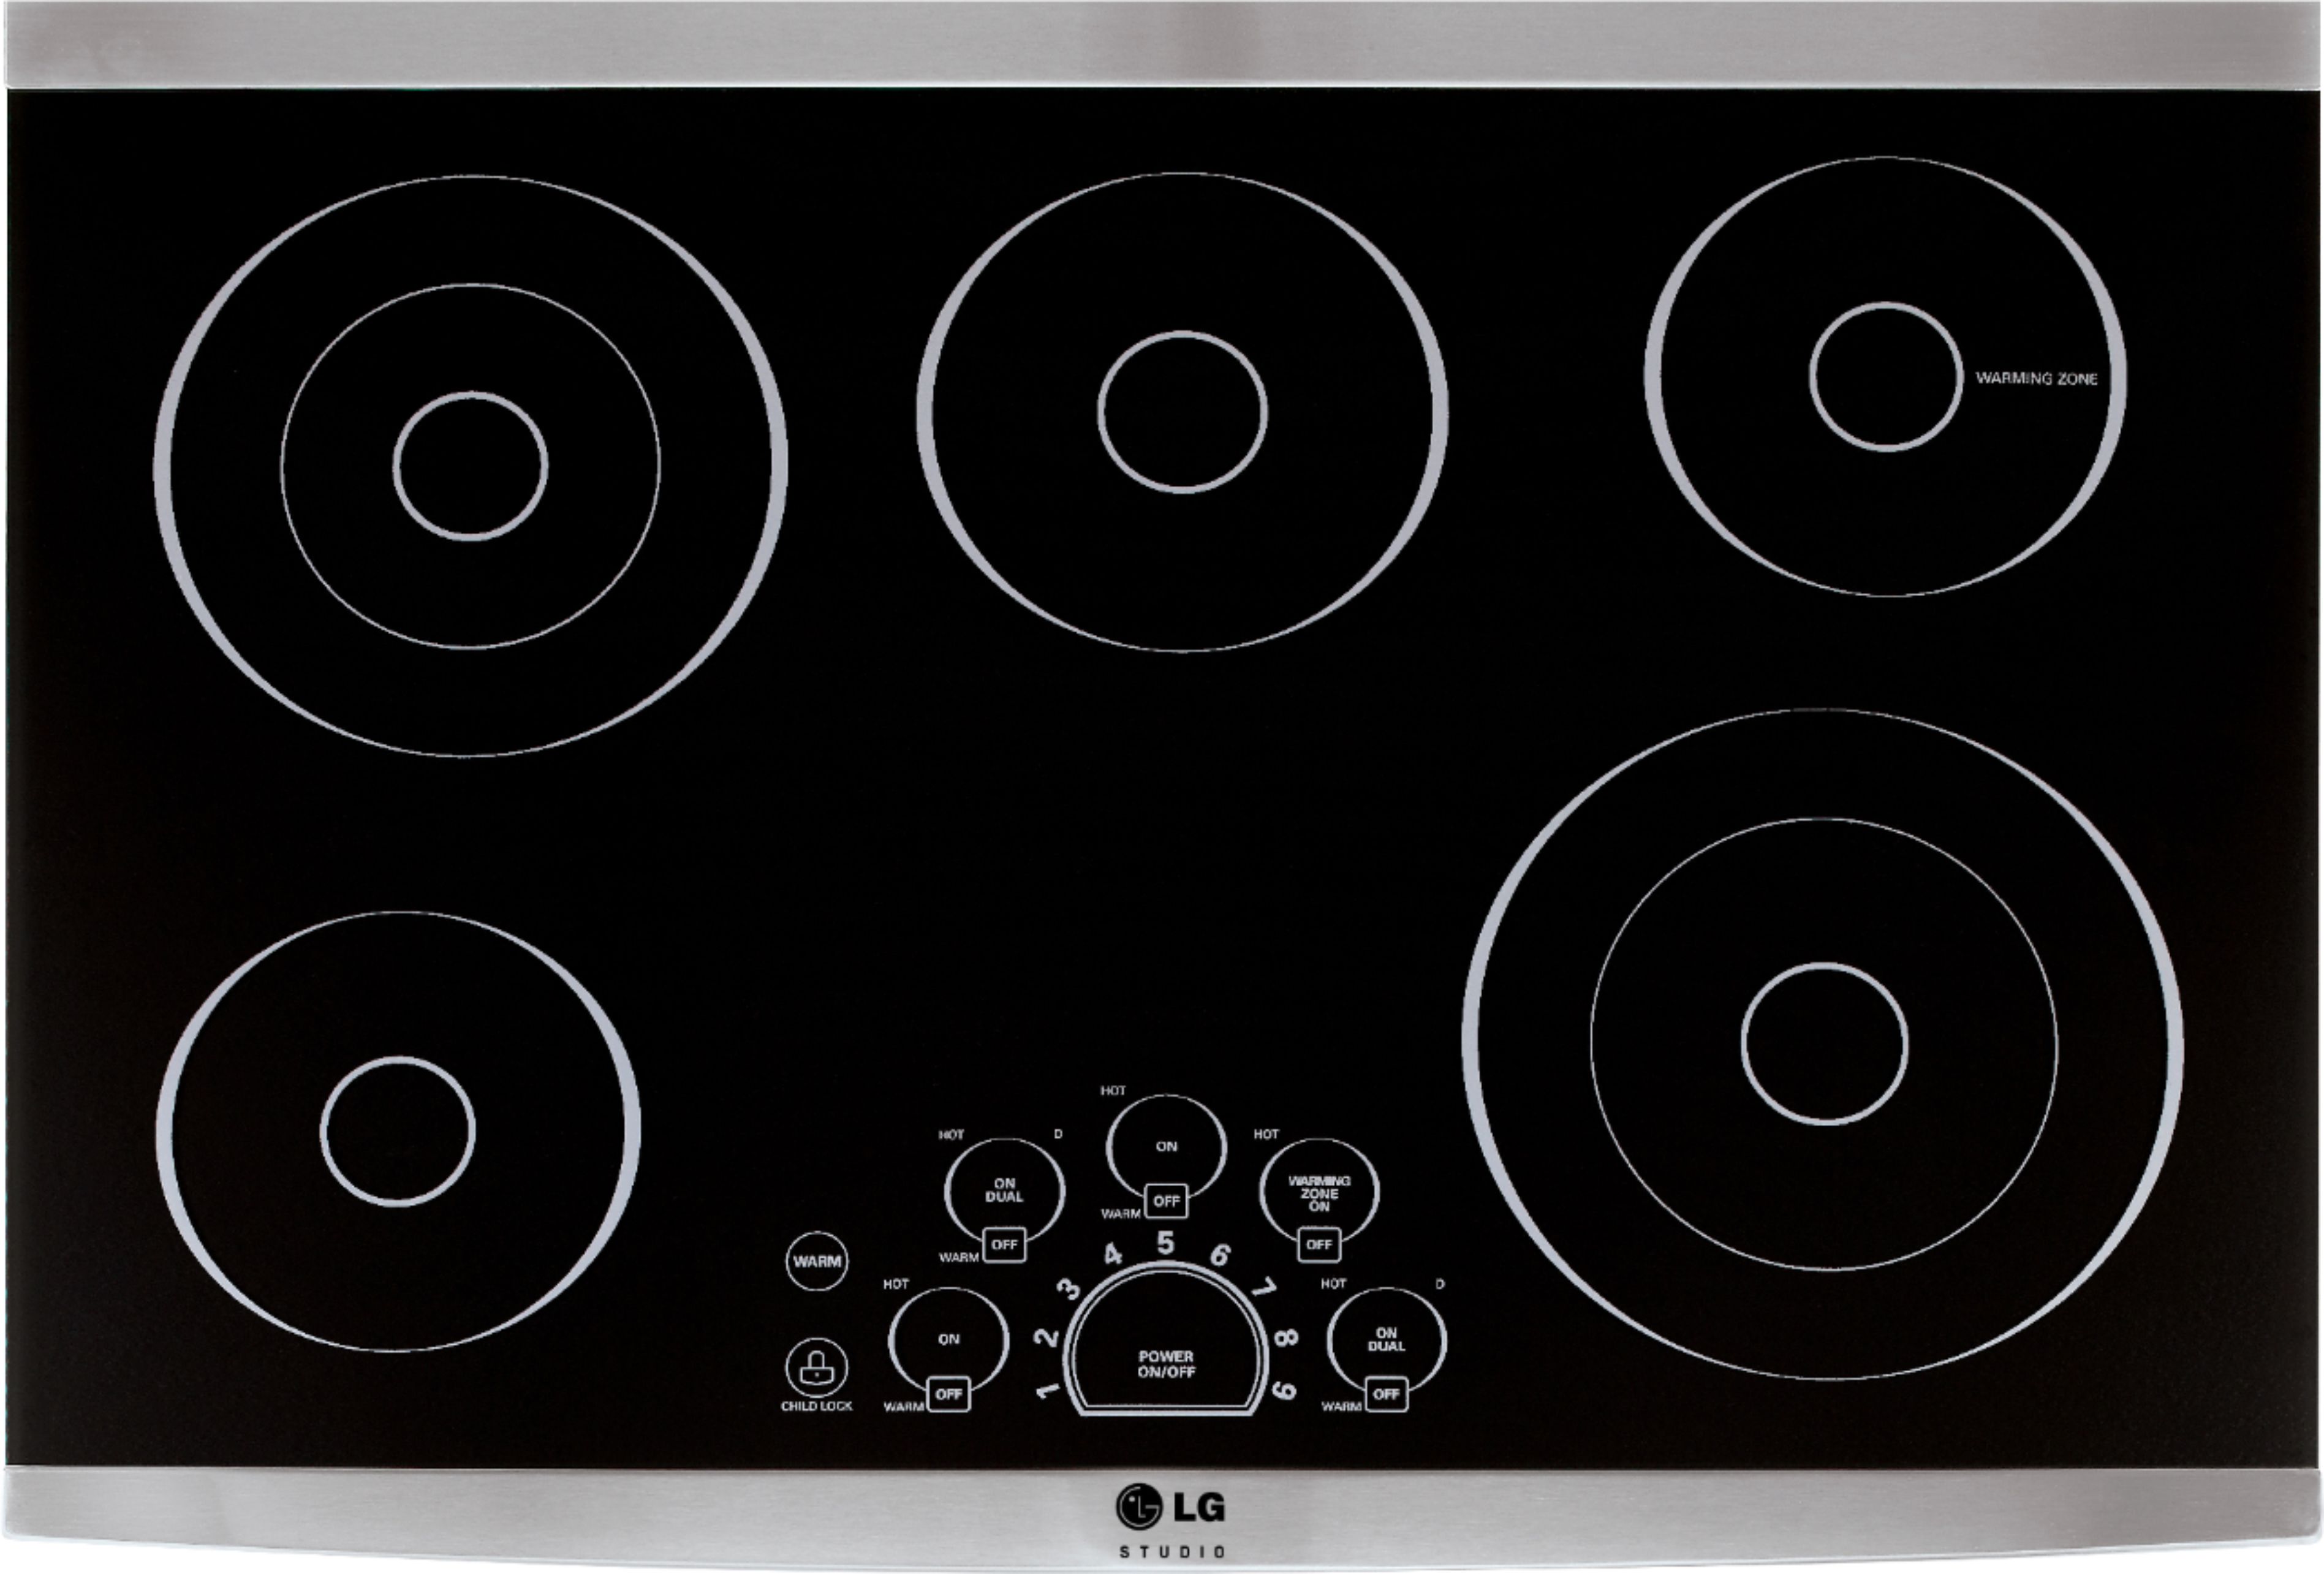 Stainless Steel Electric Cooktop 30 lg studio 30 built in electric cooktop stainless steel front zoom